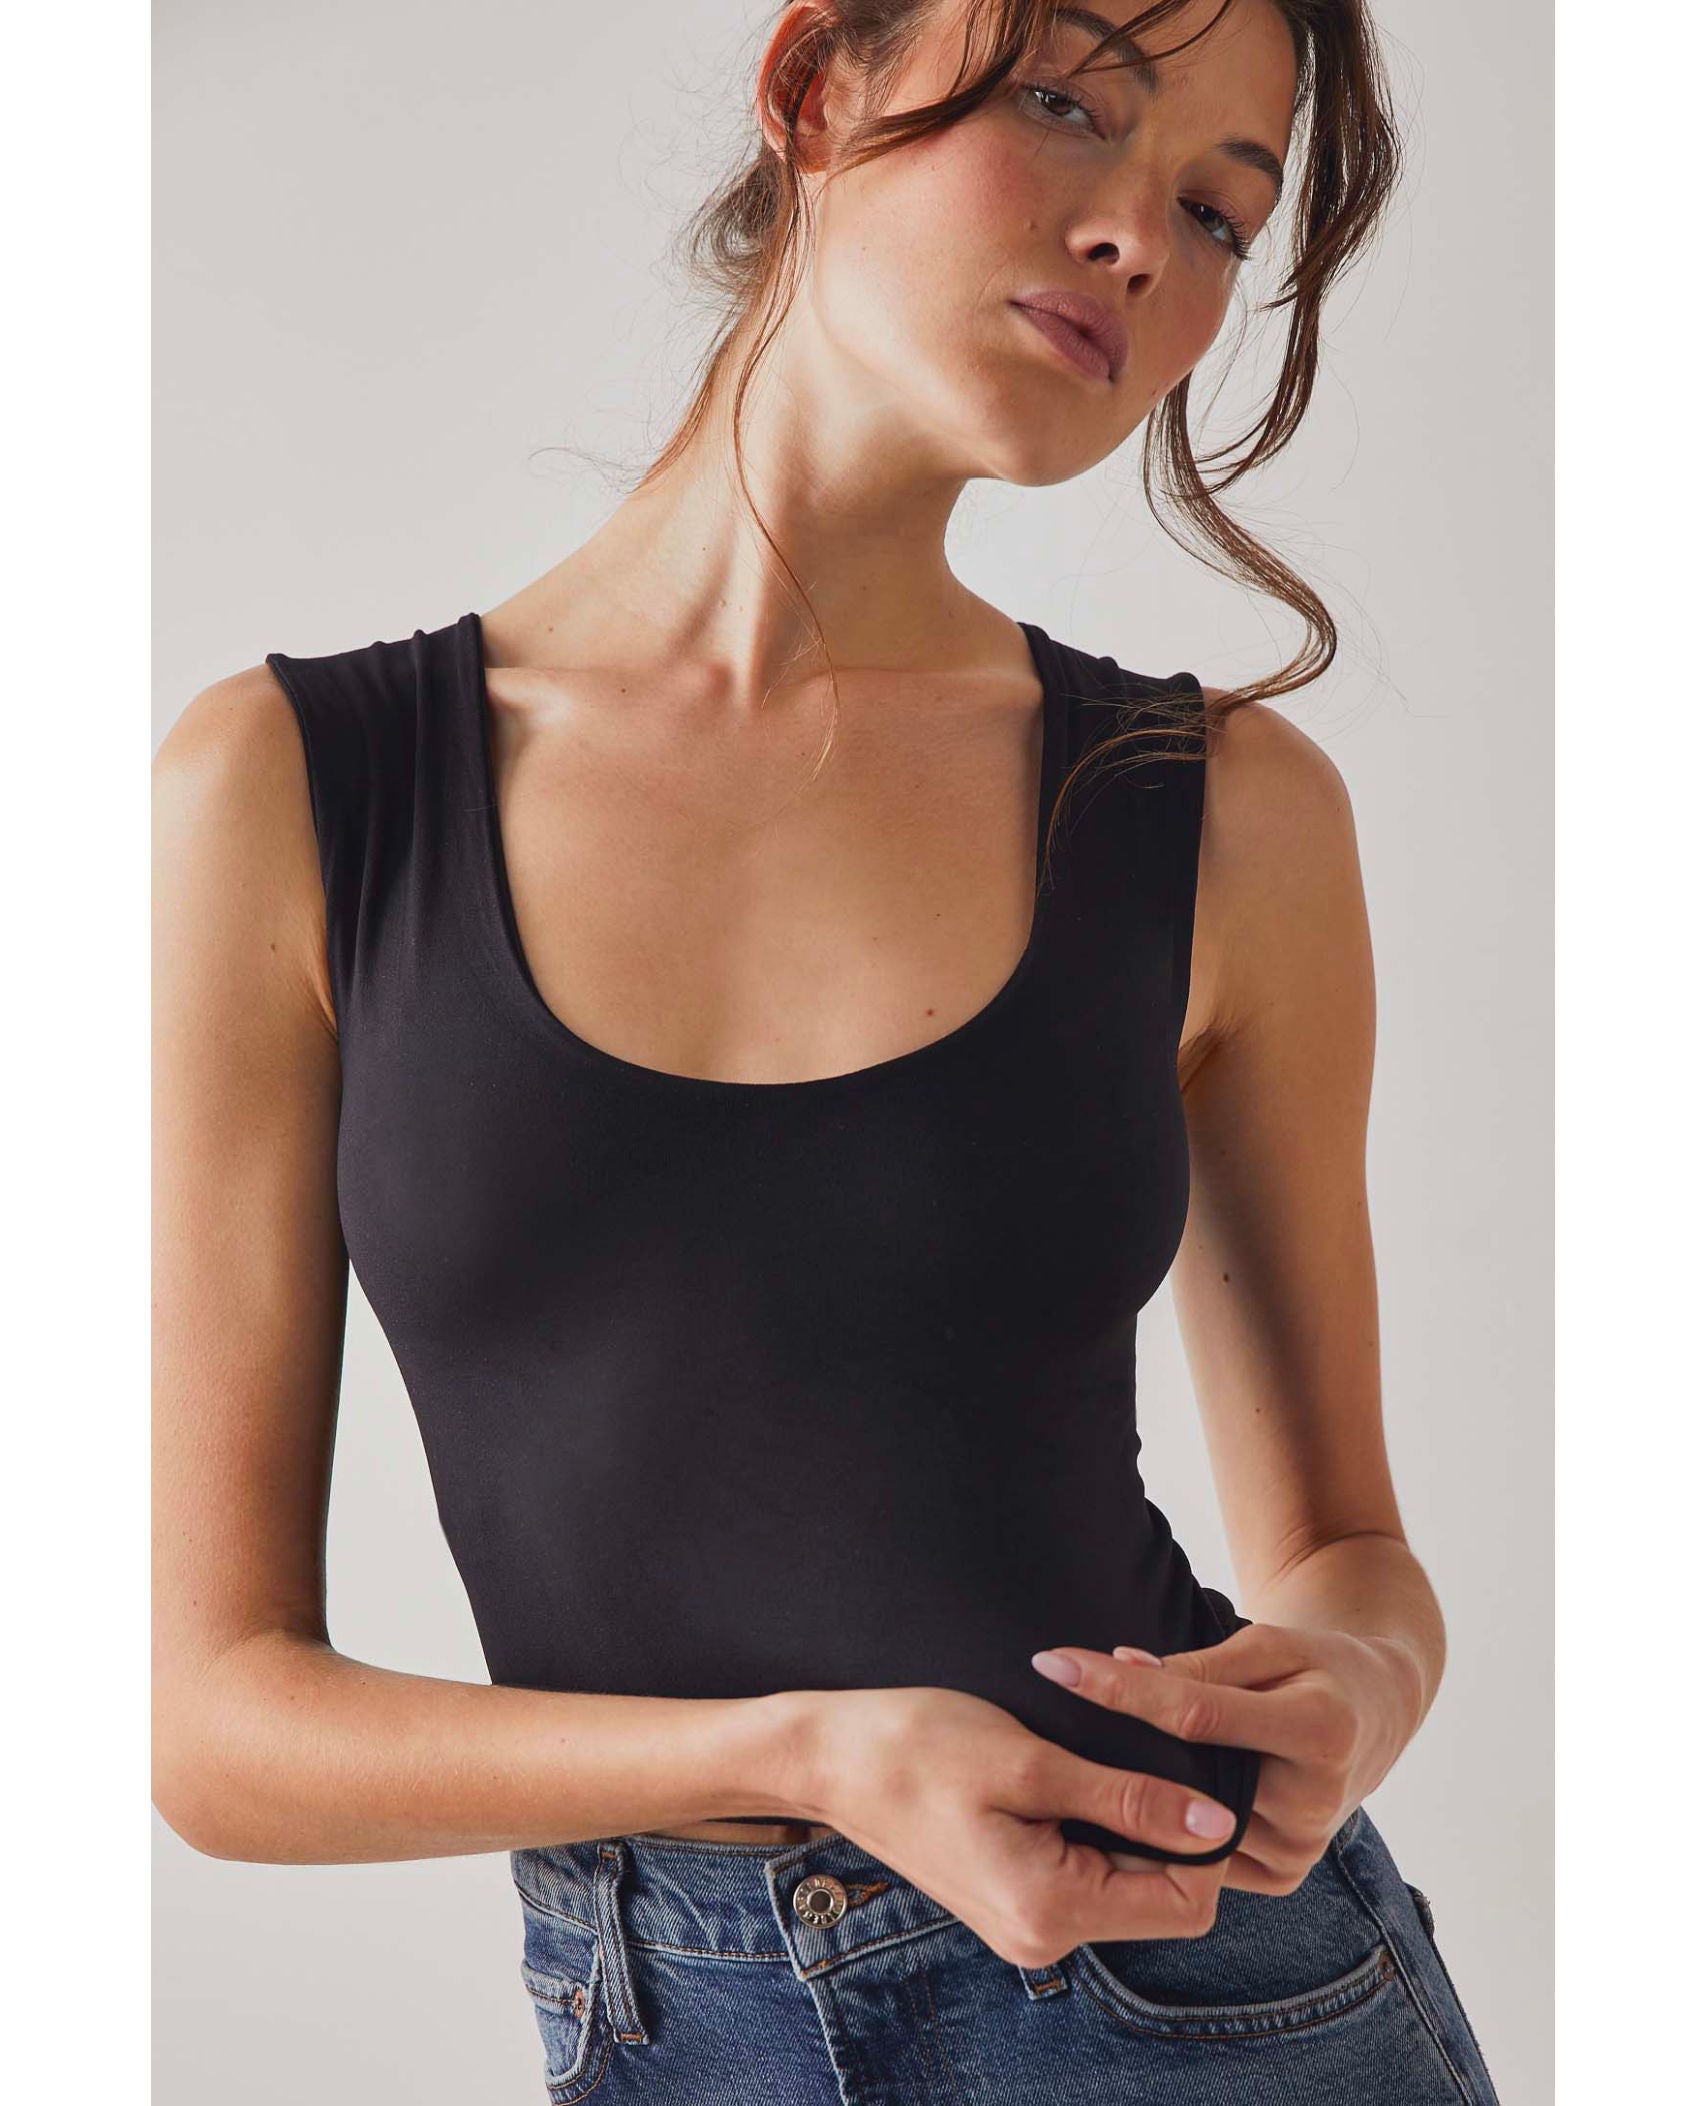 Clean Lines Muscle Cami Black